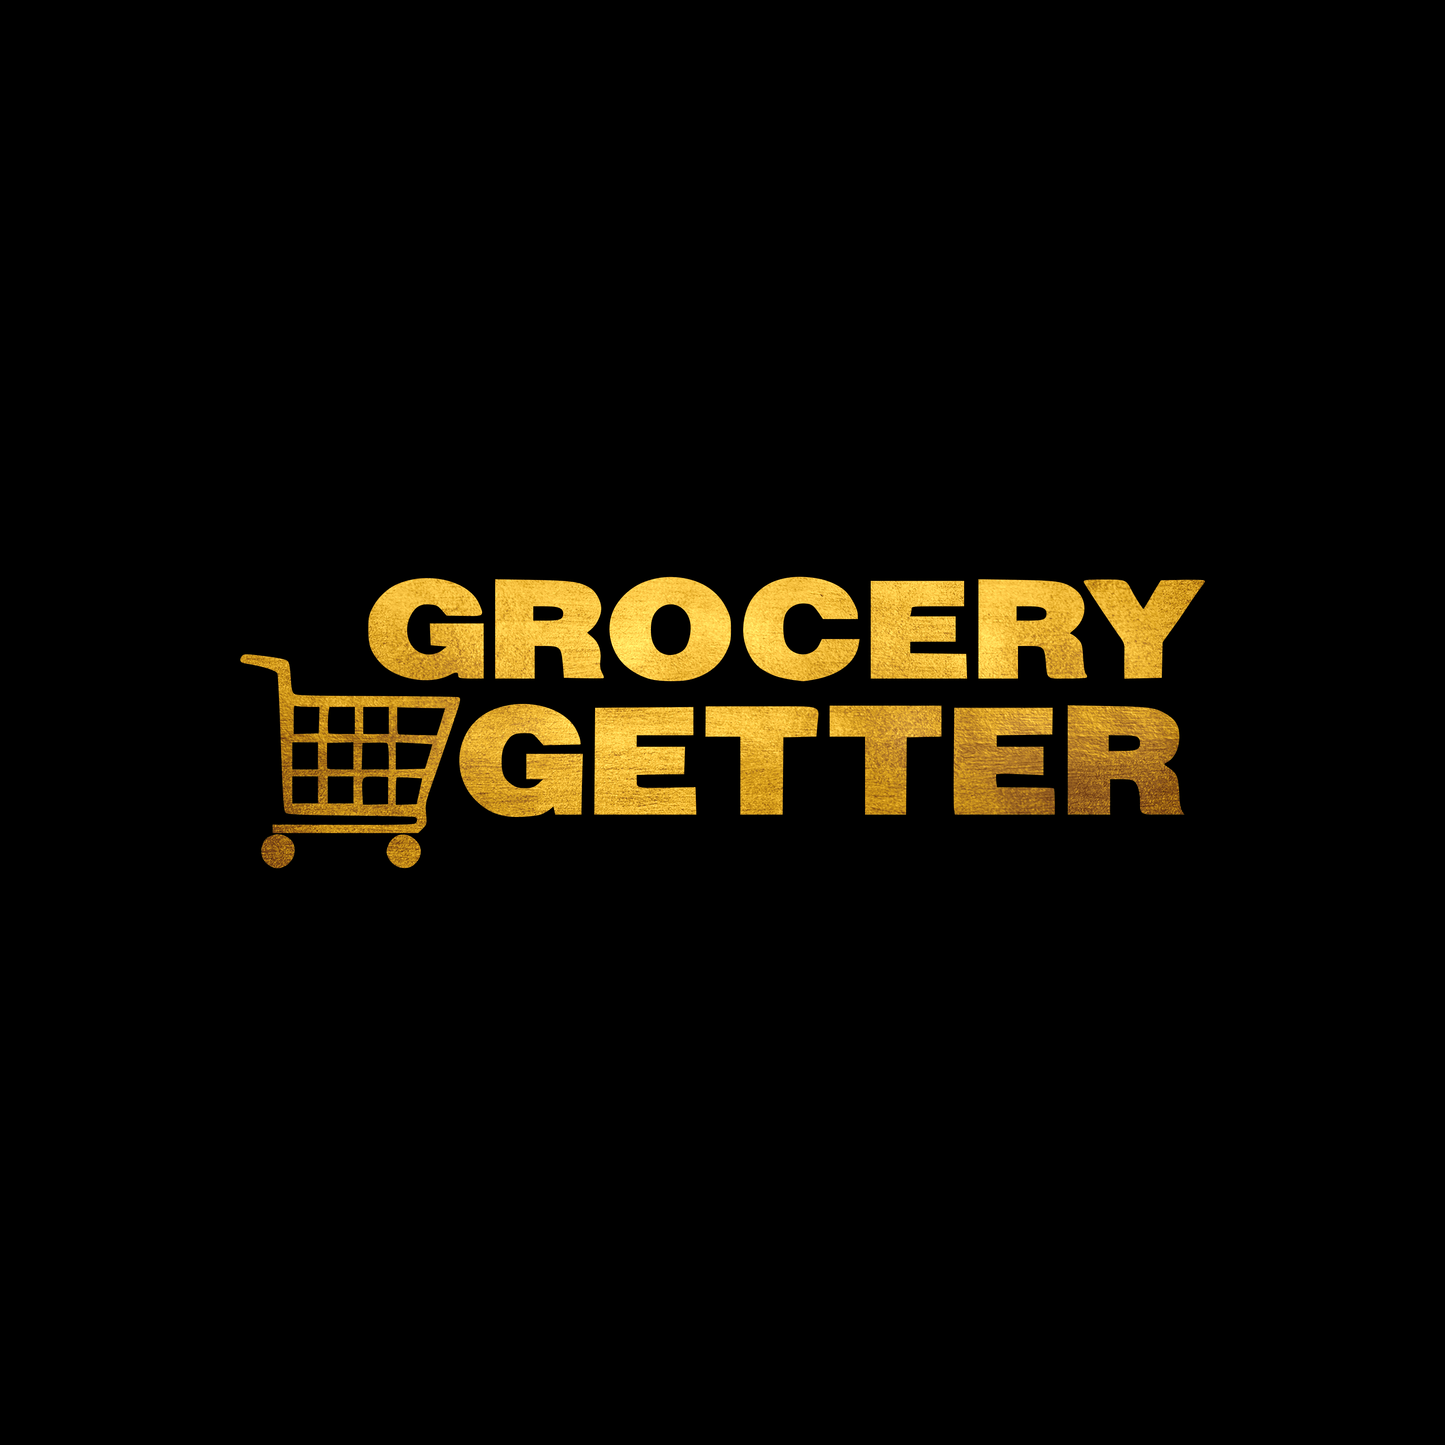 Grocery getter sticker decal